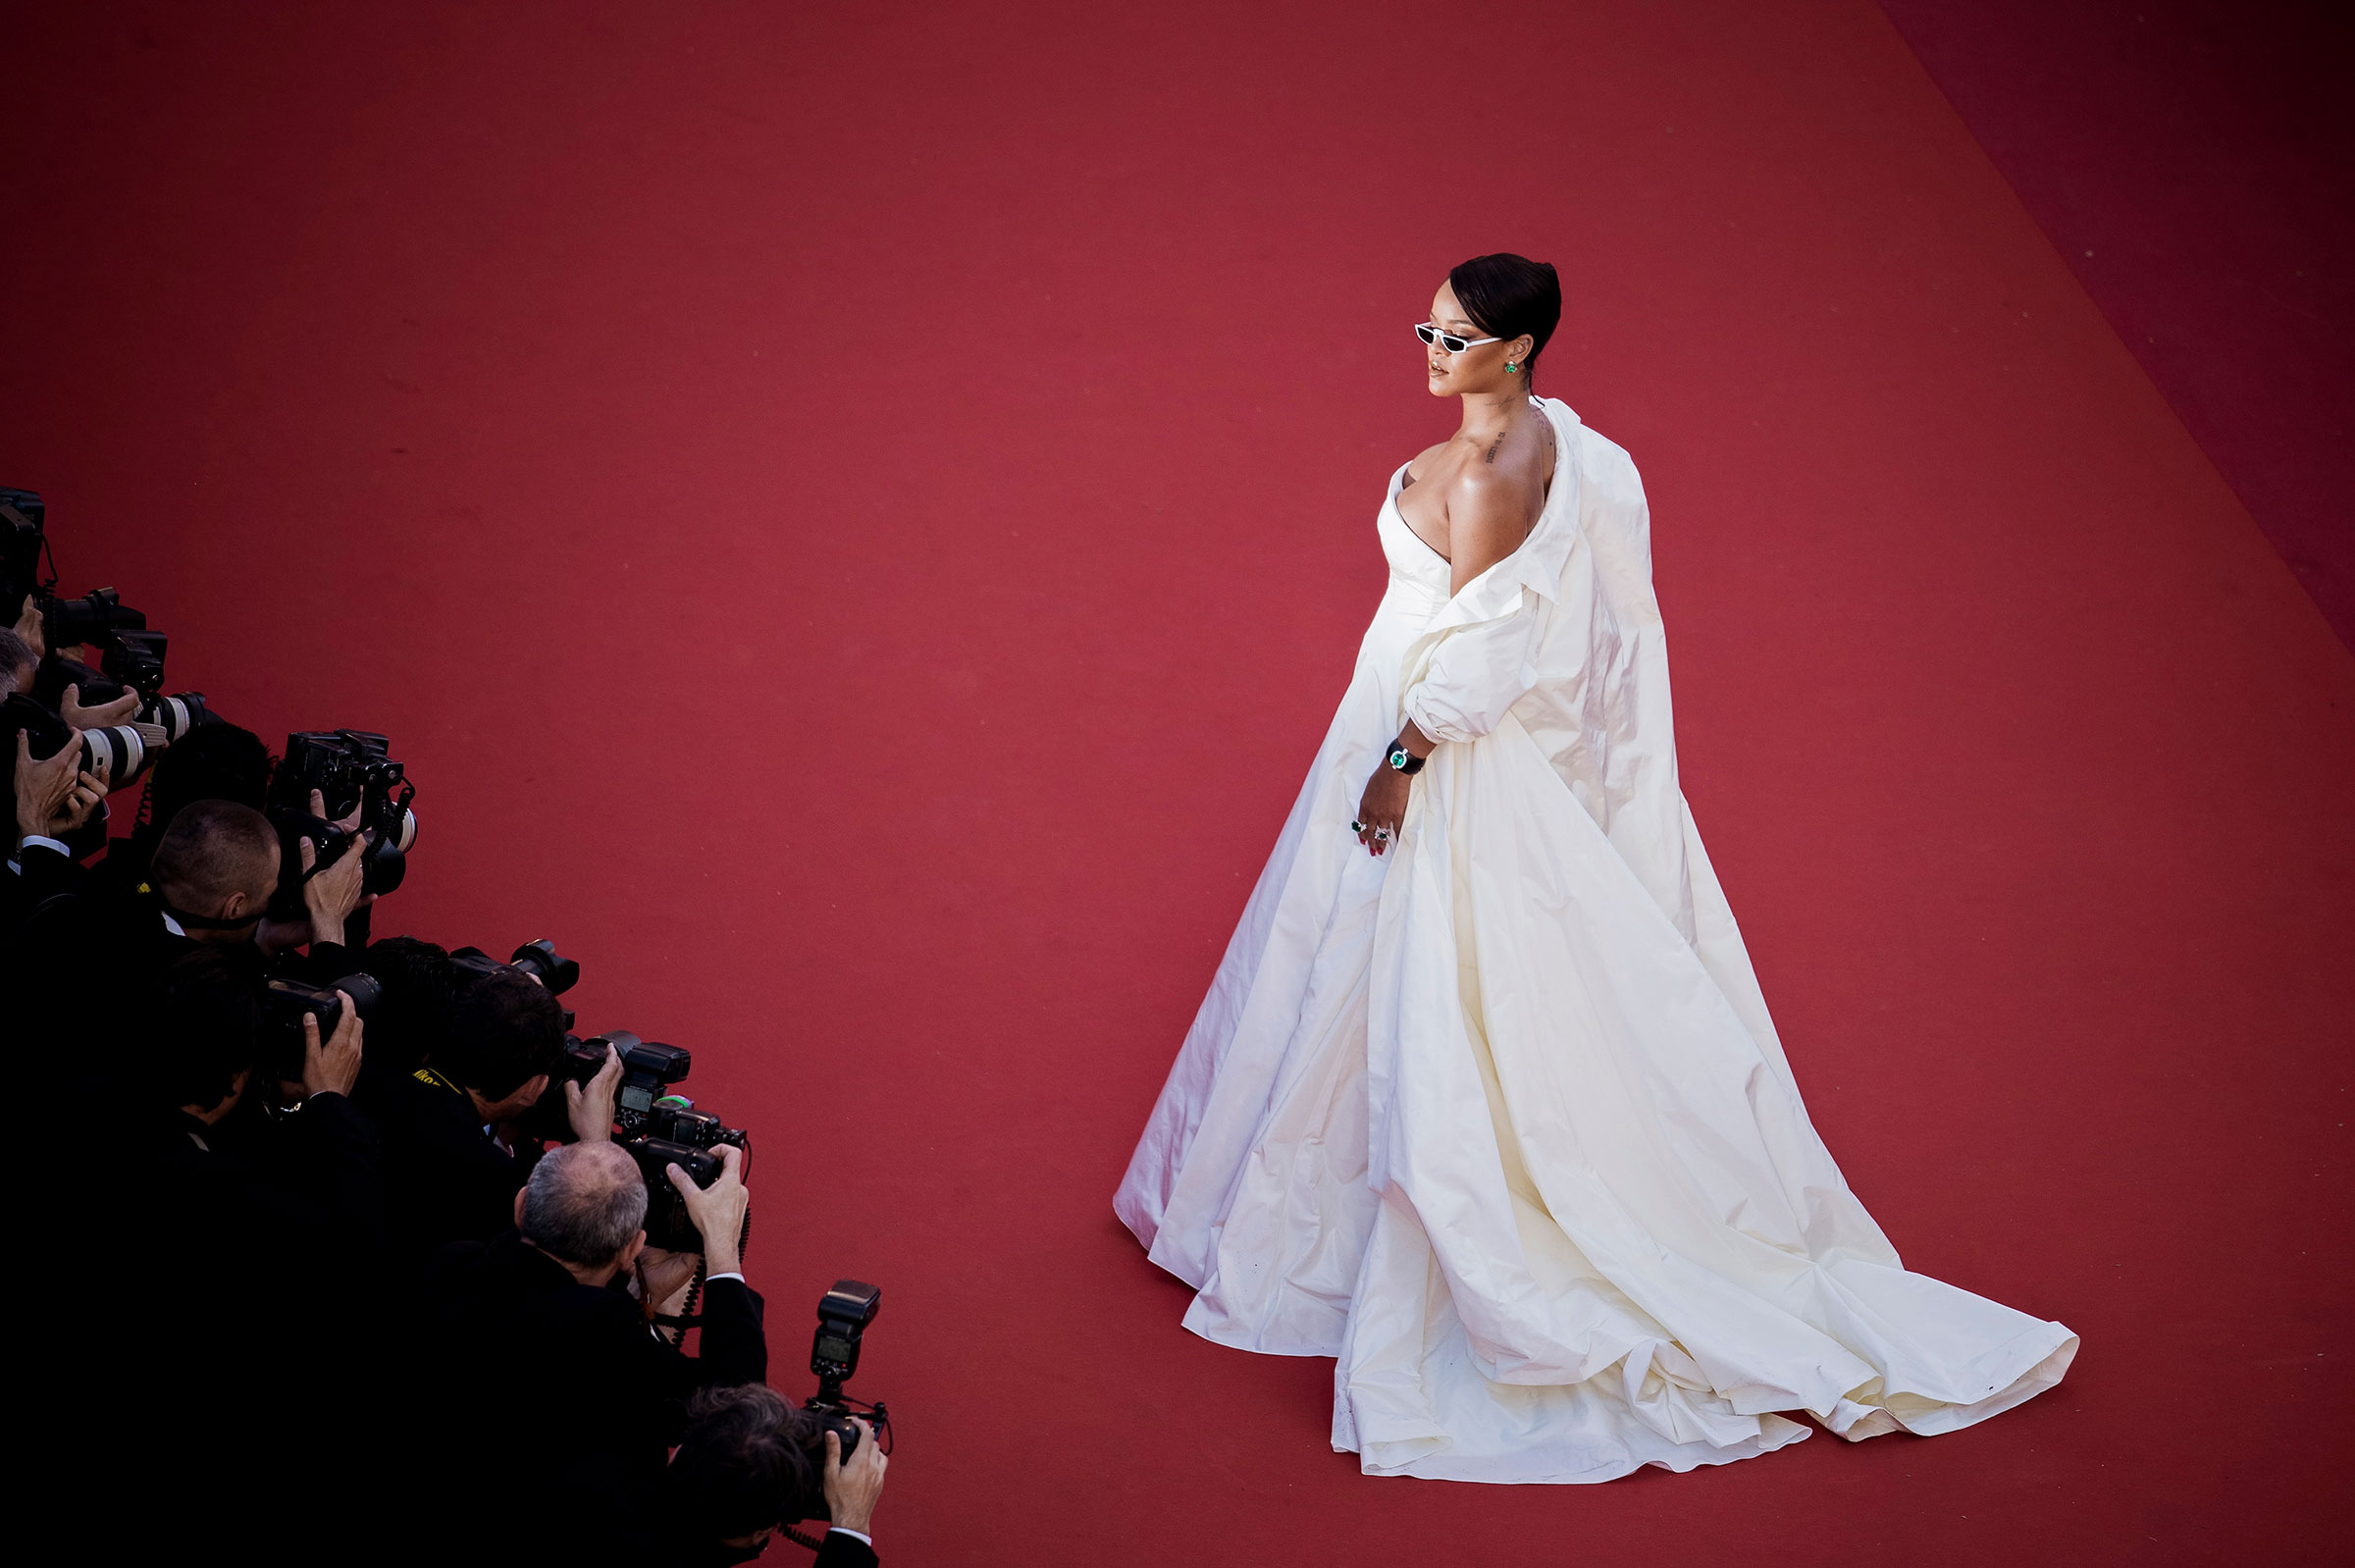 Rihanna attends the "Okja" screening during the 70th annual Cannes Film Festival at Palais des Festivals on May 19, 2017. (Francois Durand—Getty Images)